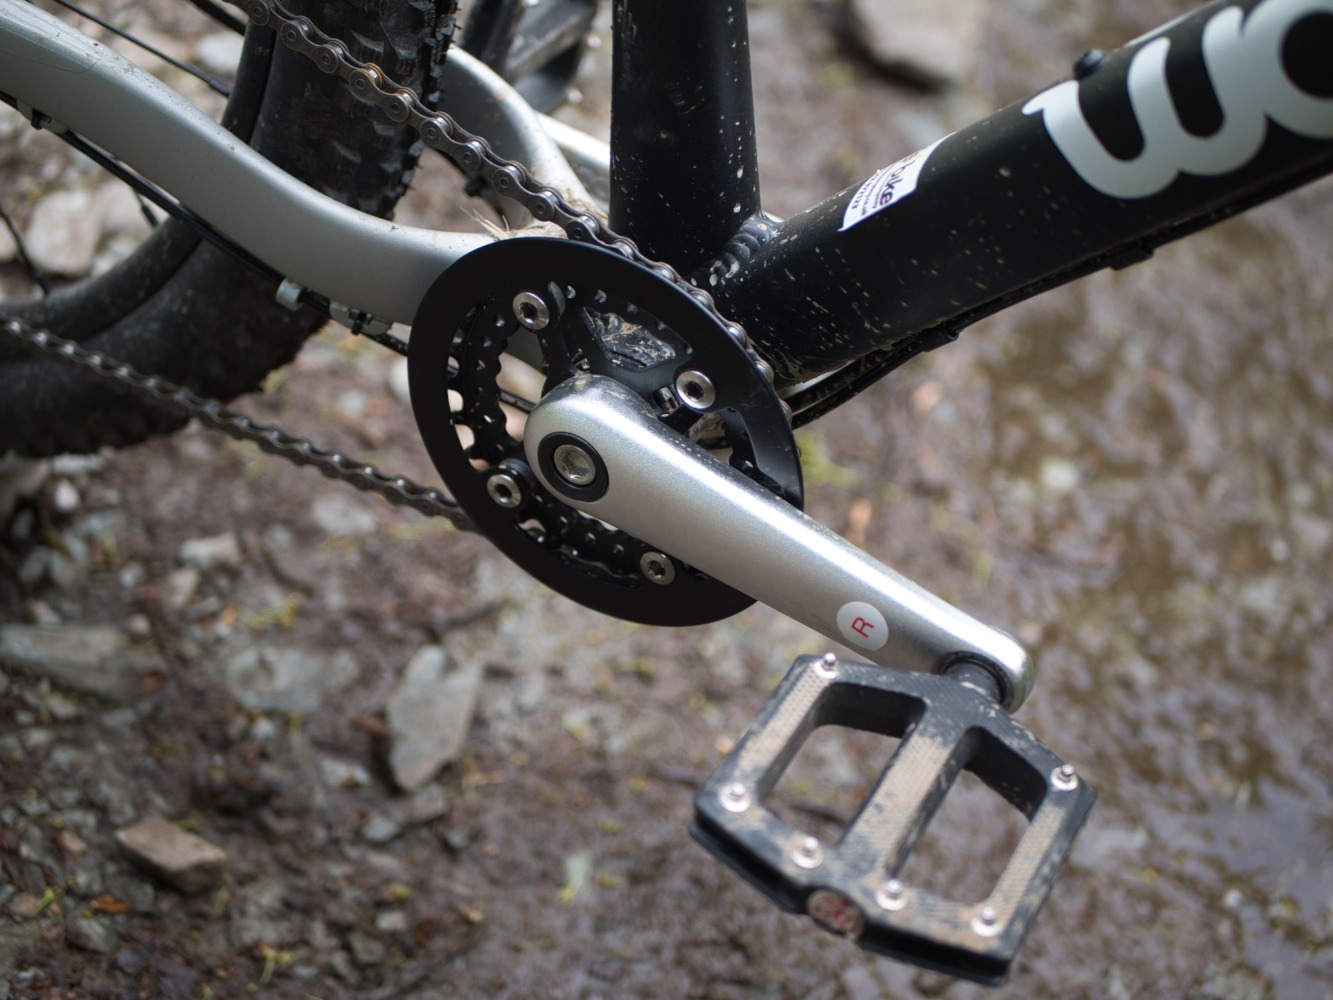 woom OFF AIR 5 review: close up of the woom OFF AIR 5 mountain bike crank